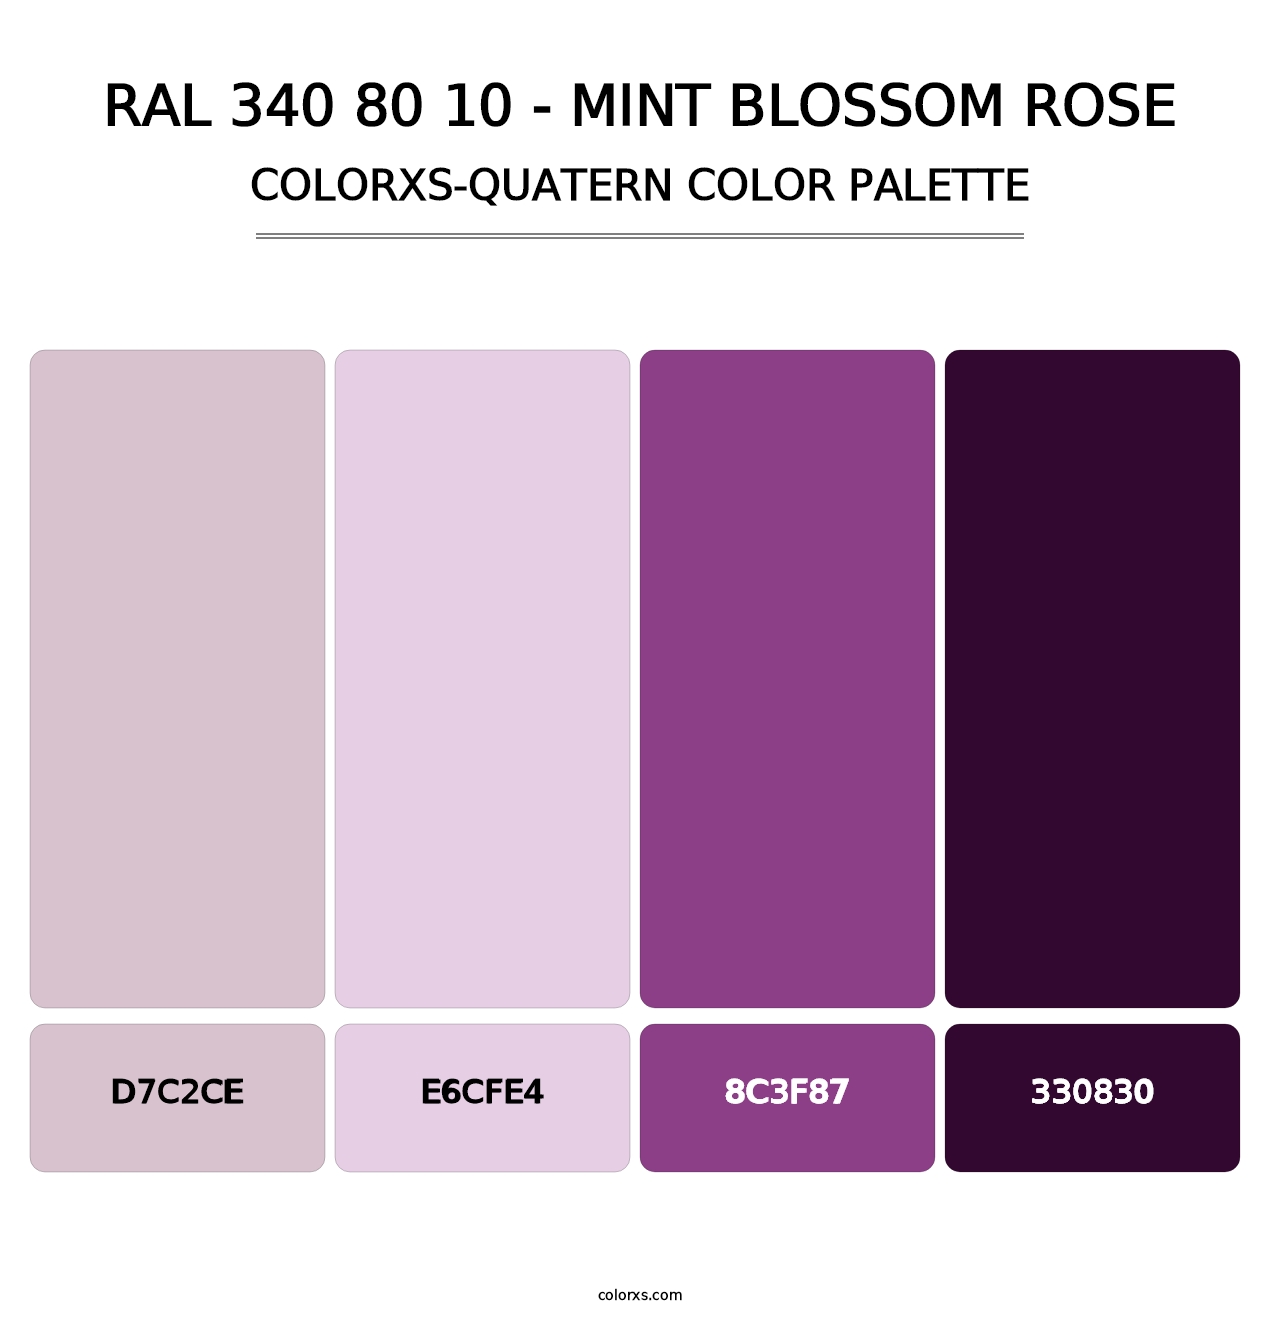 RAL 340 80 10 - Mint Blossom Rose - Colorxs Quatern Palette